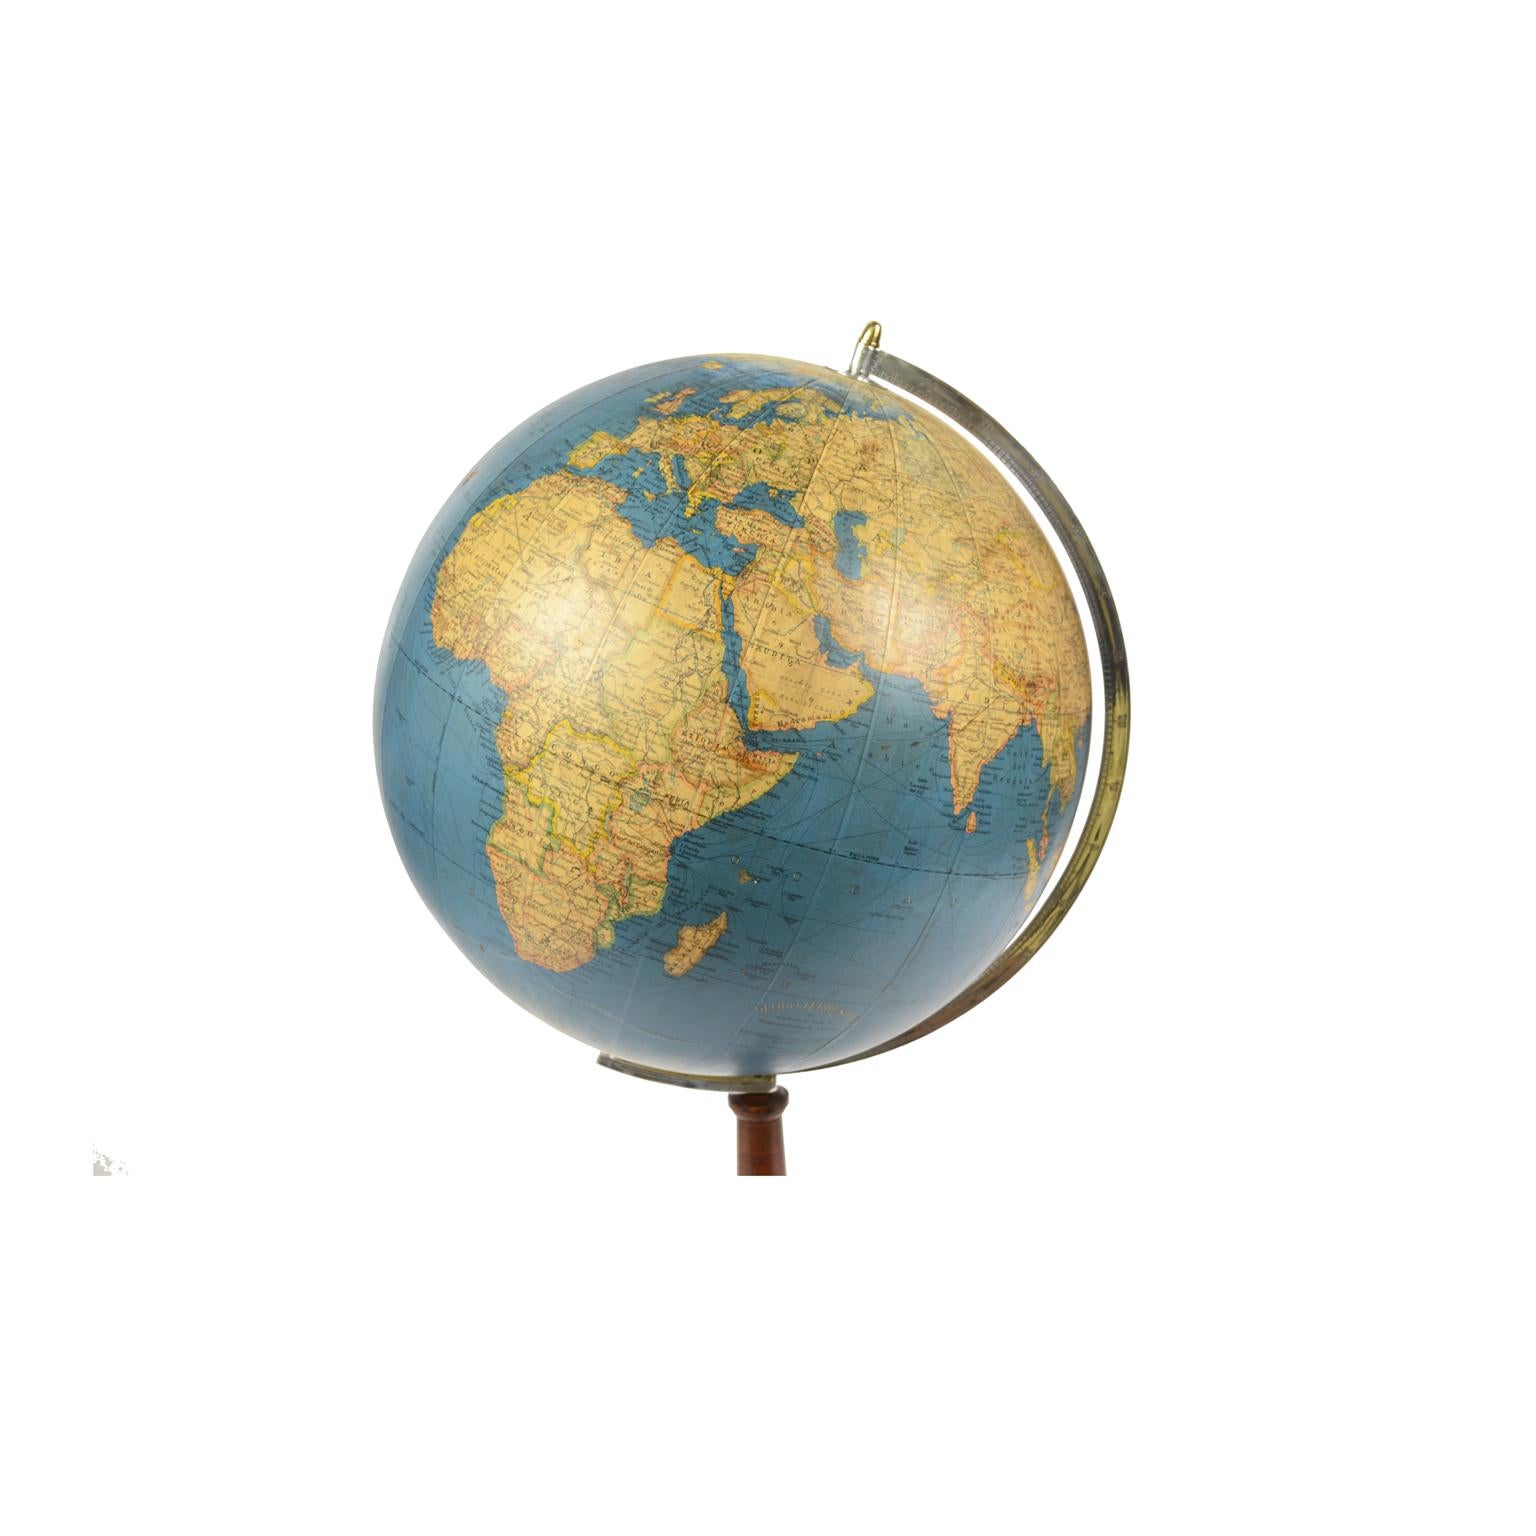 Terrestrial globe published in the late fourties by Vallardi publisher, designed and engraved by A. Minelli, papier mâché sphere covered with paper printed by emgraving on coper plate and watercolored, wooden base complete with engraved aluminum